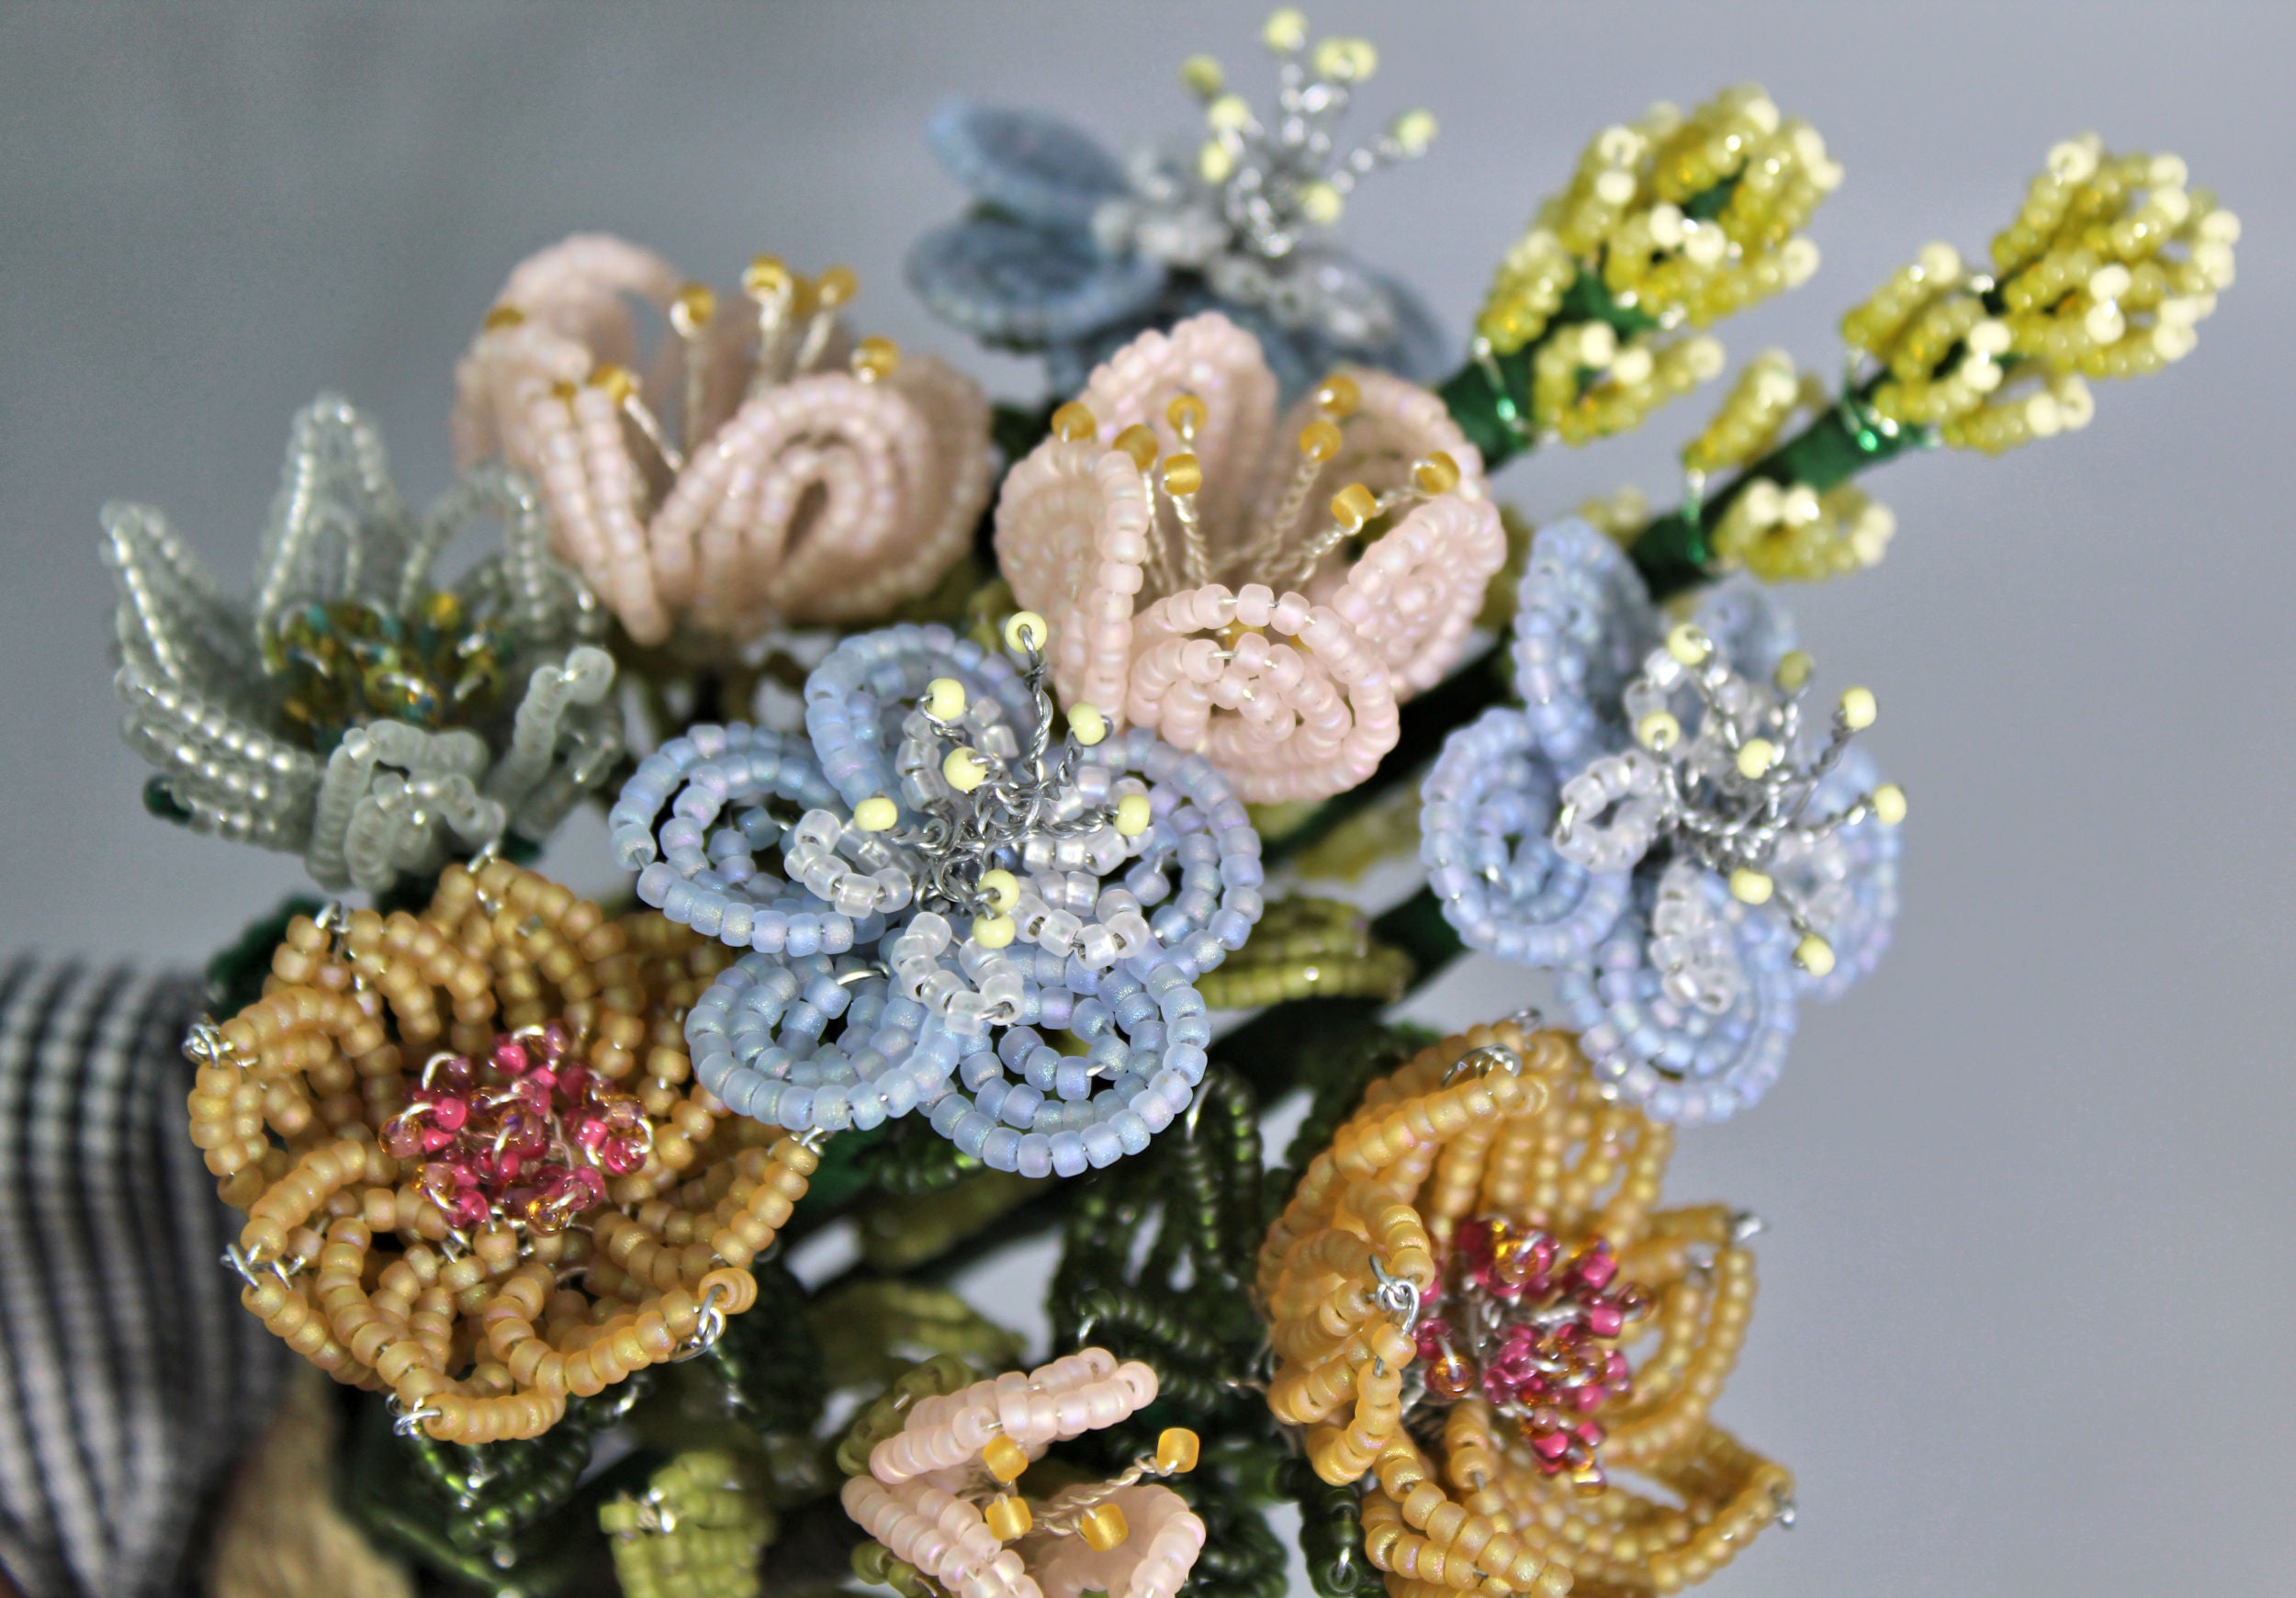 Old-Fashioned Forget-Me-Not and Cherry Blossom Posy - SOLD